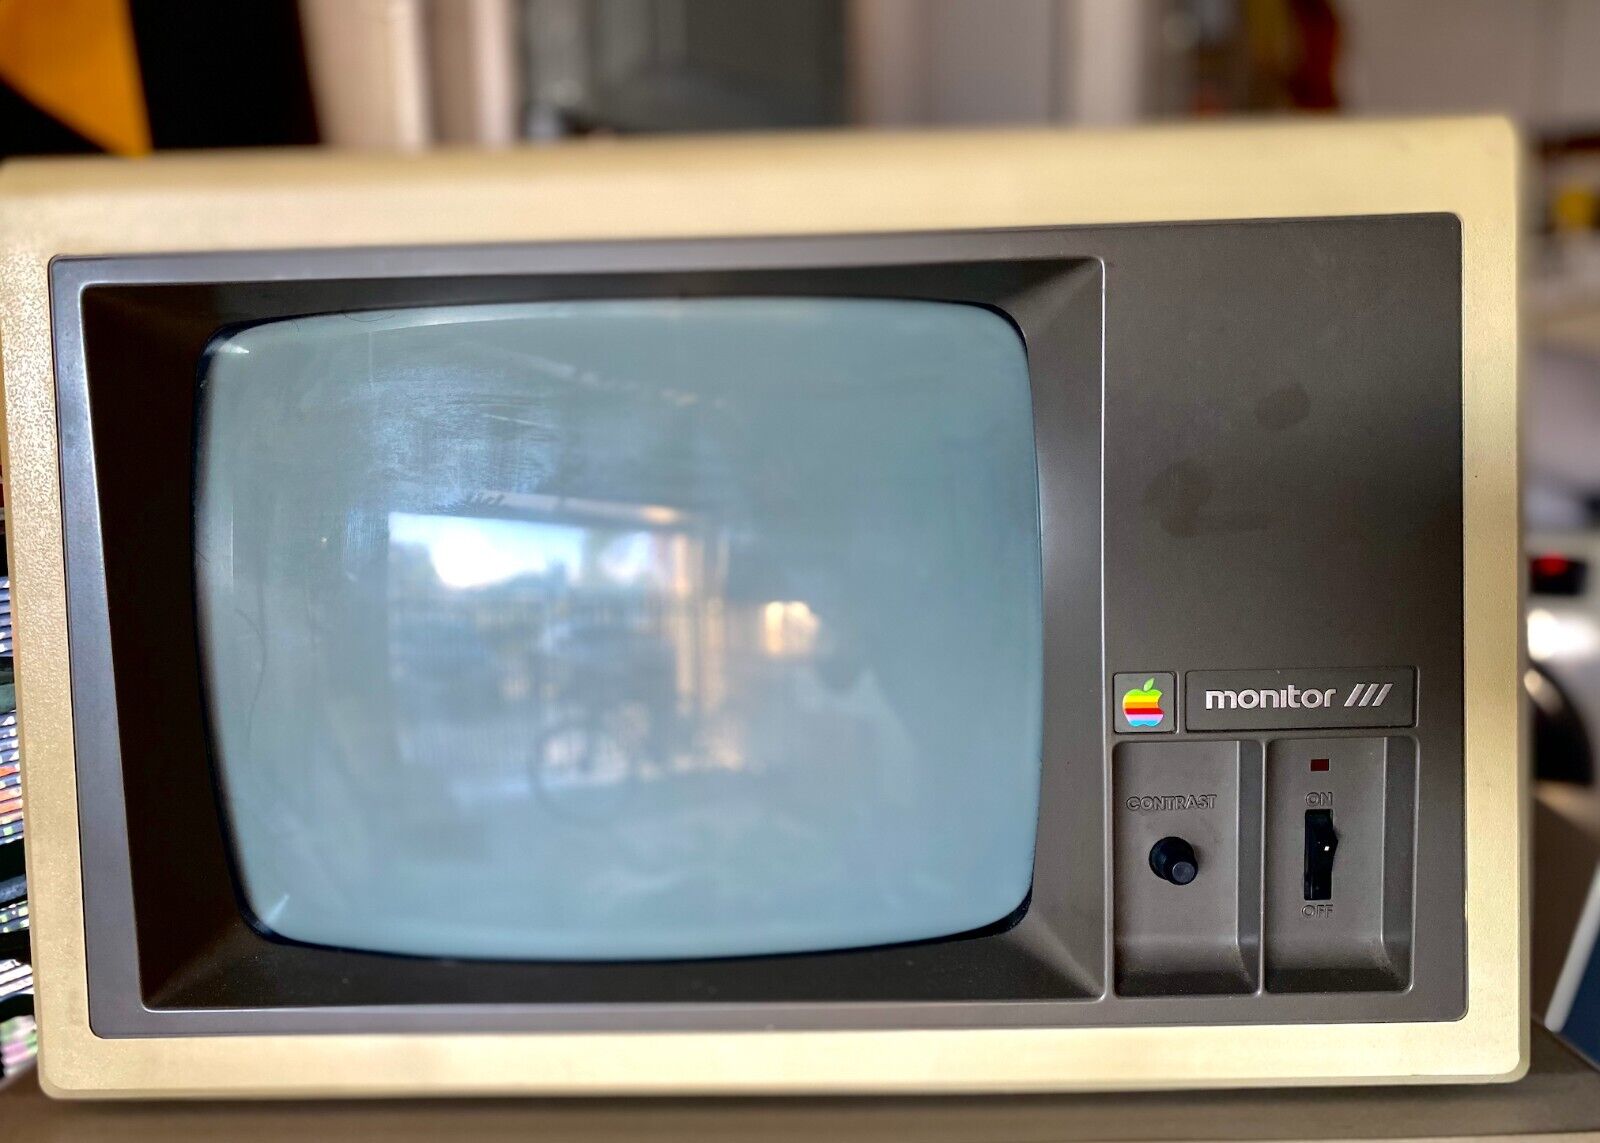 Vintage Apple Monitor III A3M0039 in Working Condition 1983